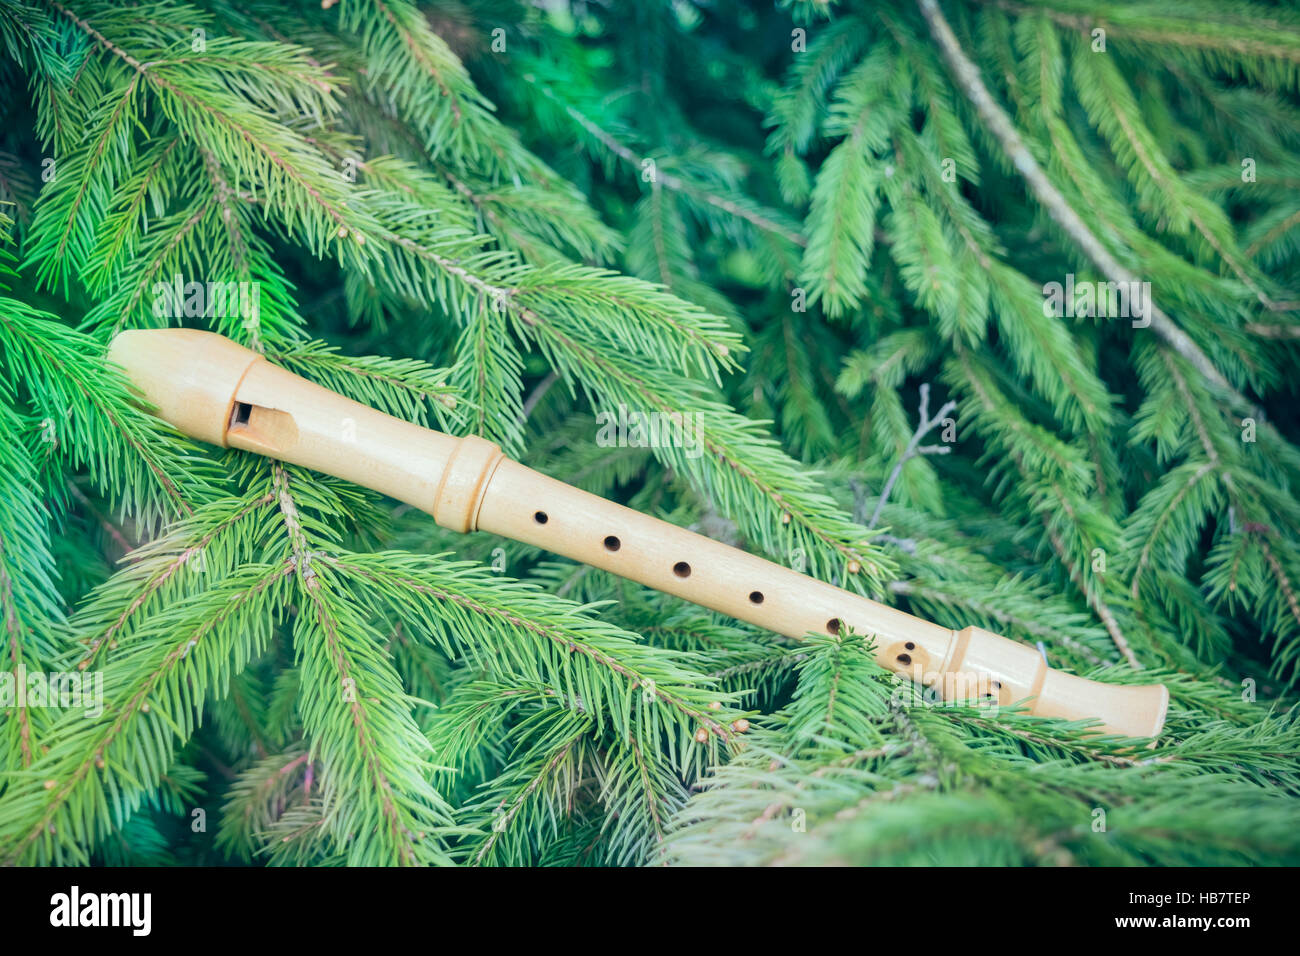 Flute on fir branches Stock Photo